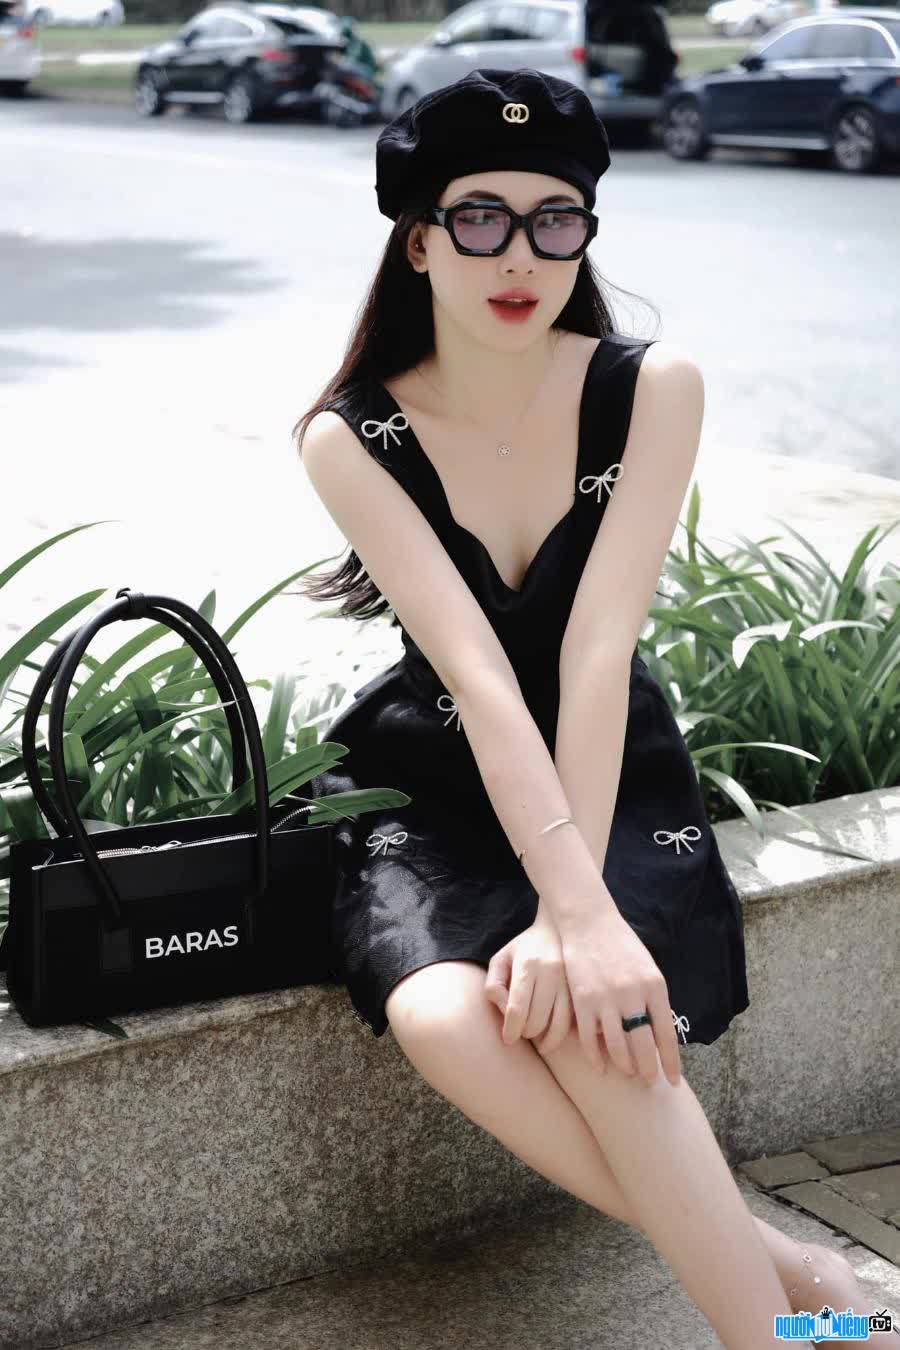 She wants to bring confidence and attraction to women. Vietnamese women